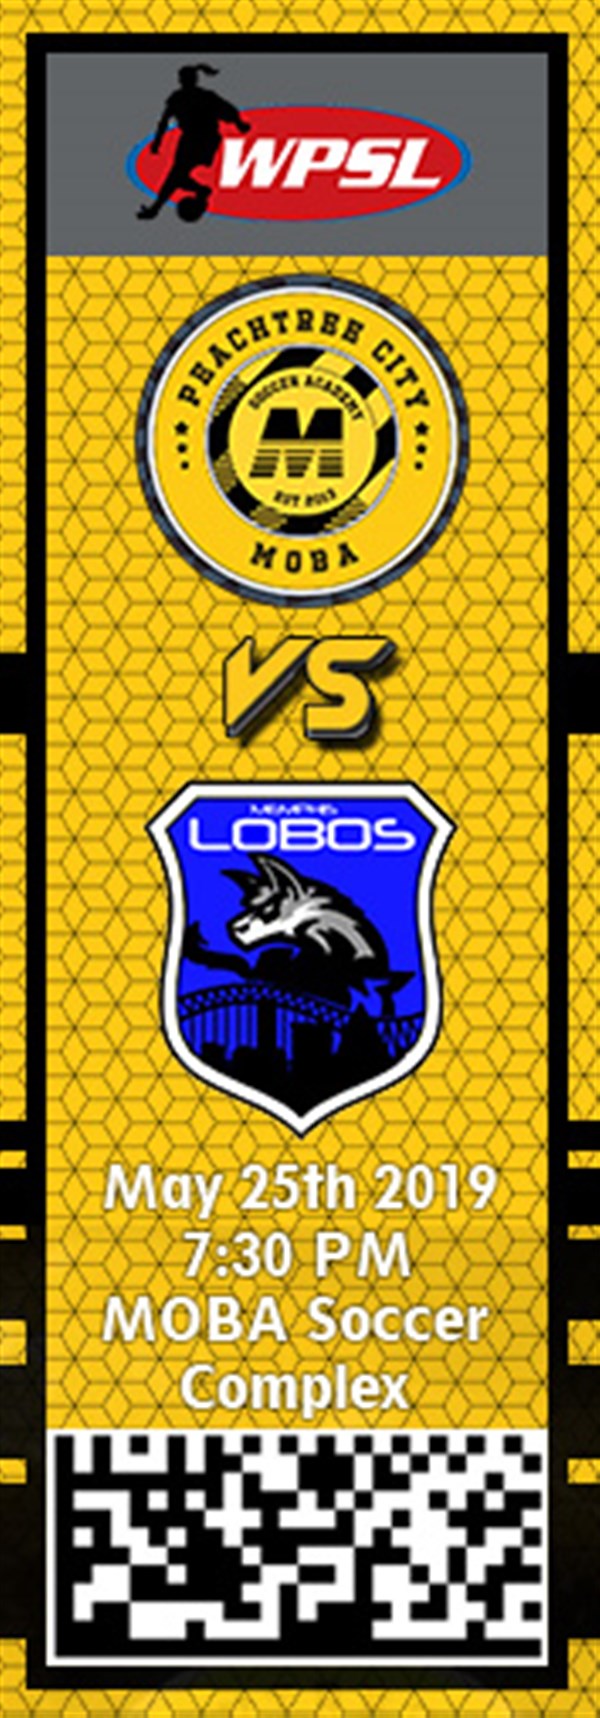 Get Information and buy tickets to PTC MOBA vs. Memphis Lobos WPSL on MOBA Soccer Academy